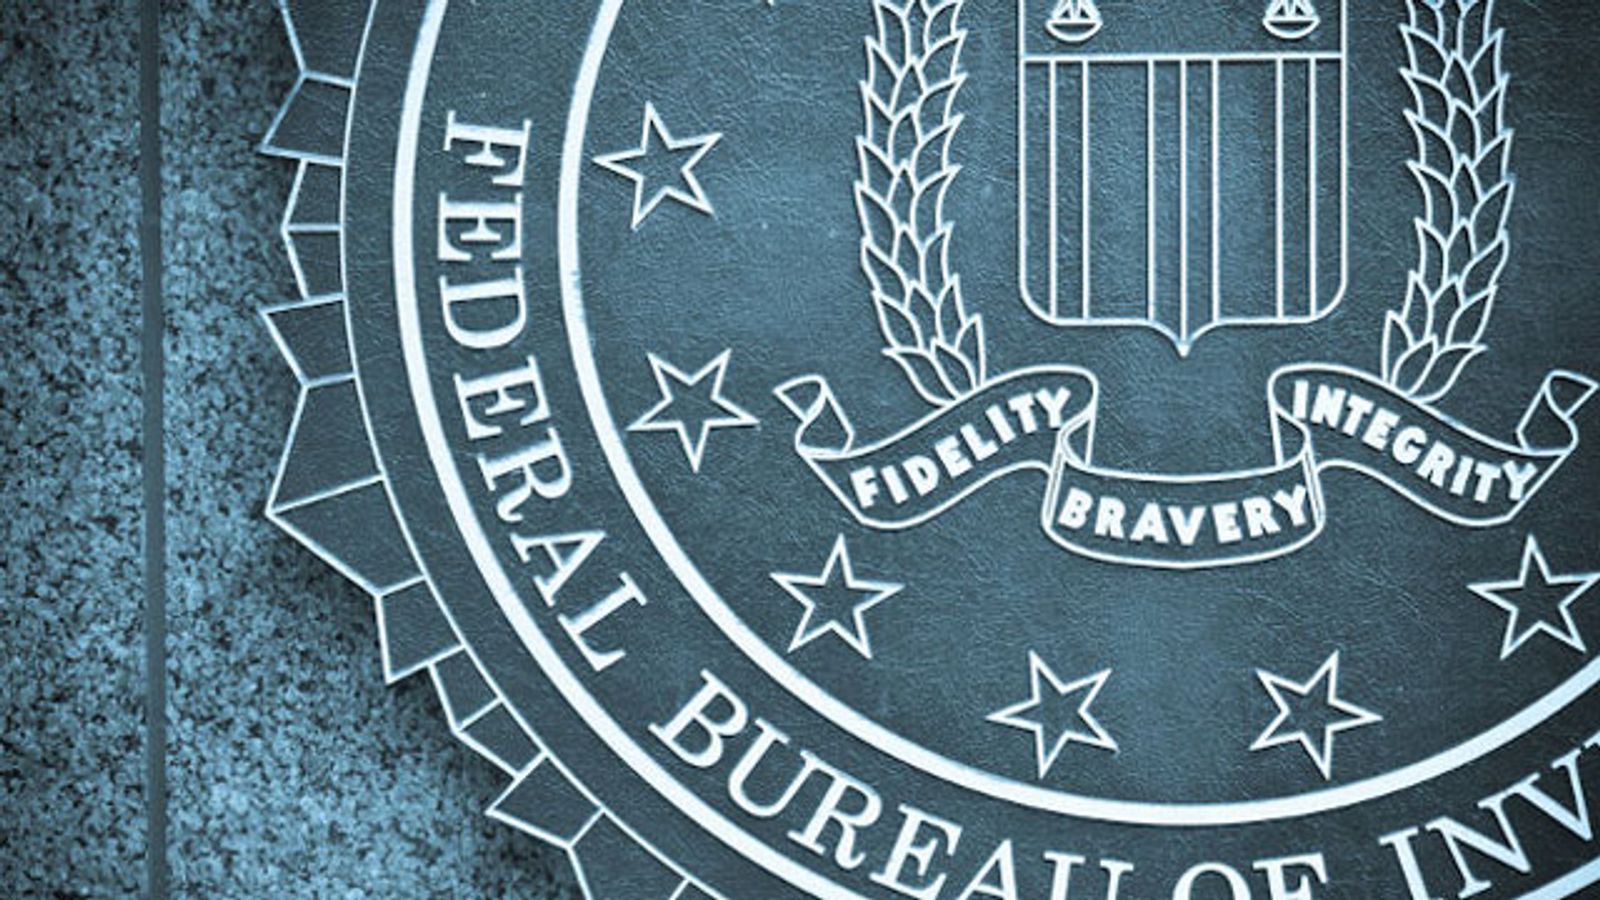 DoJ Issues Report Critical of FBI Cyber-Security Readiness